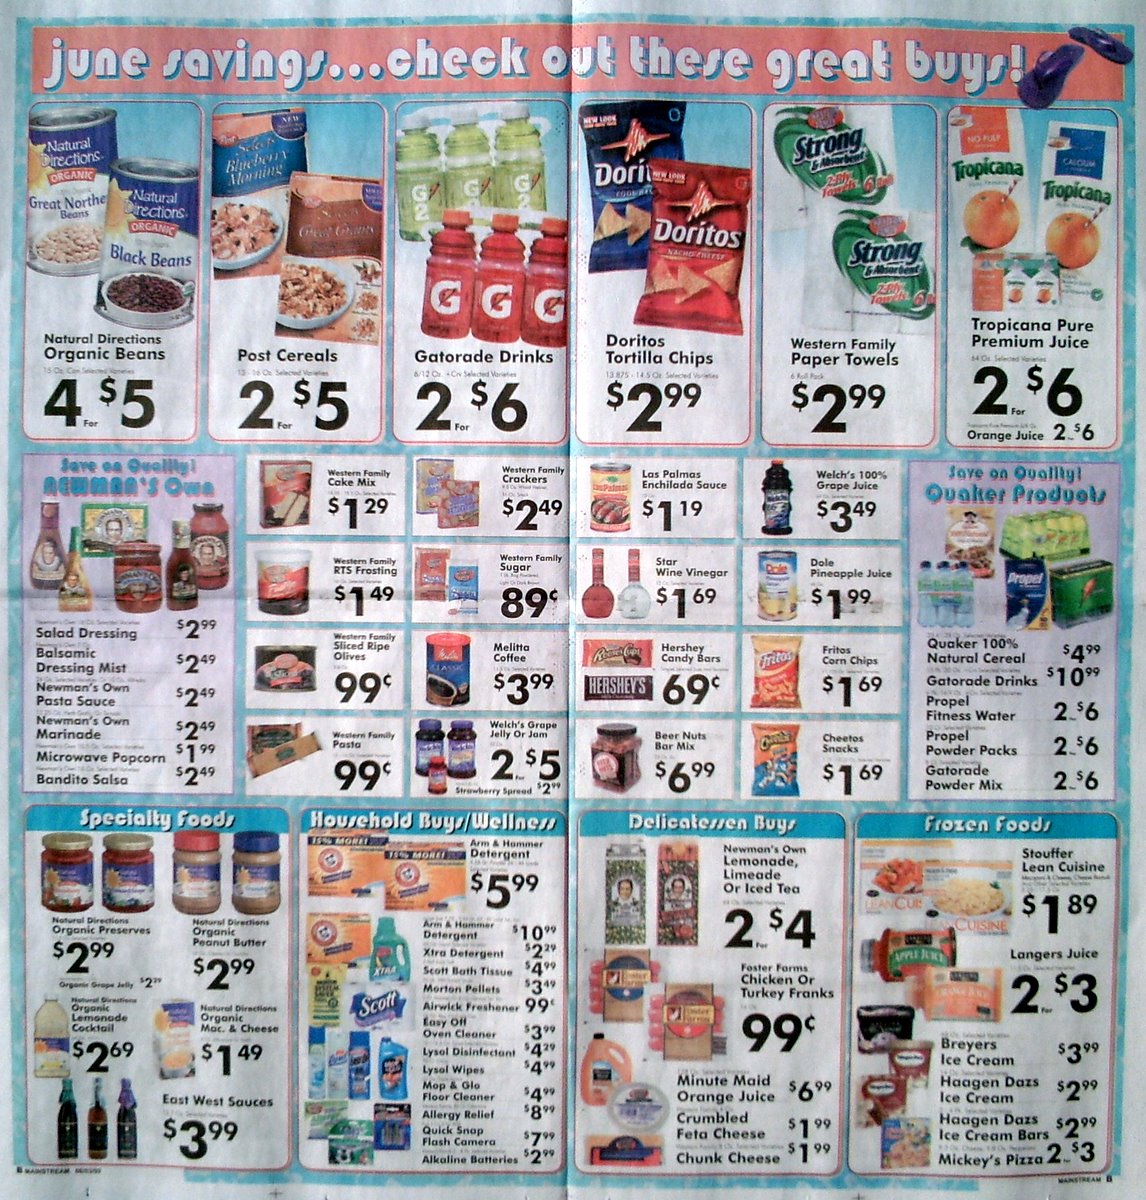 Big Trees Market Weekly Ad for June 3-9, 2009